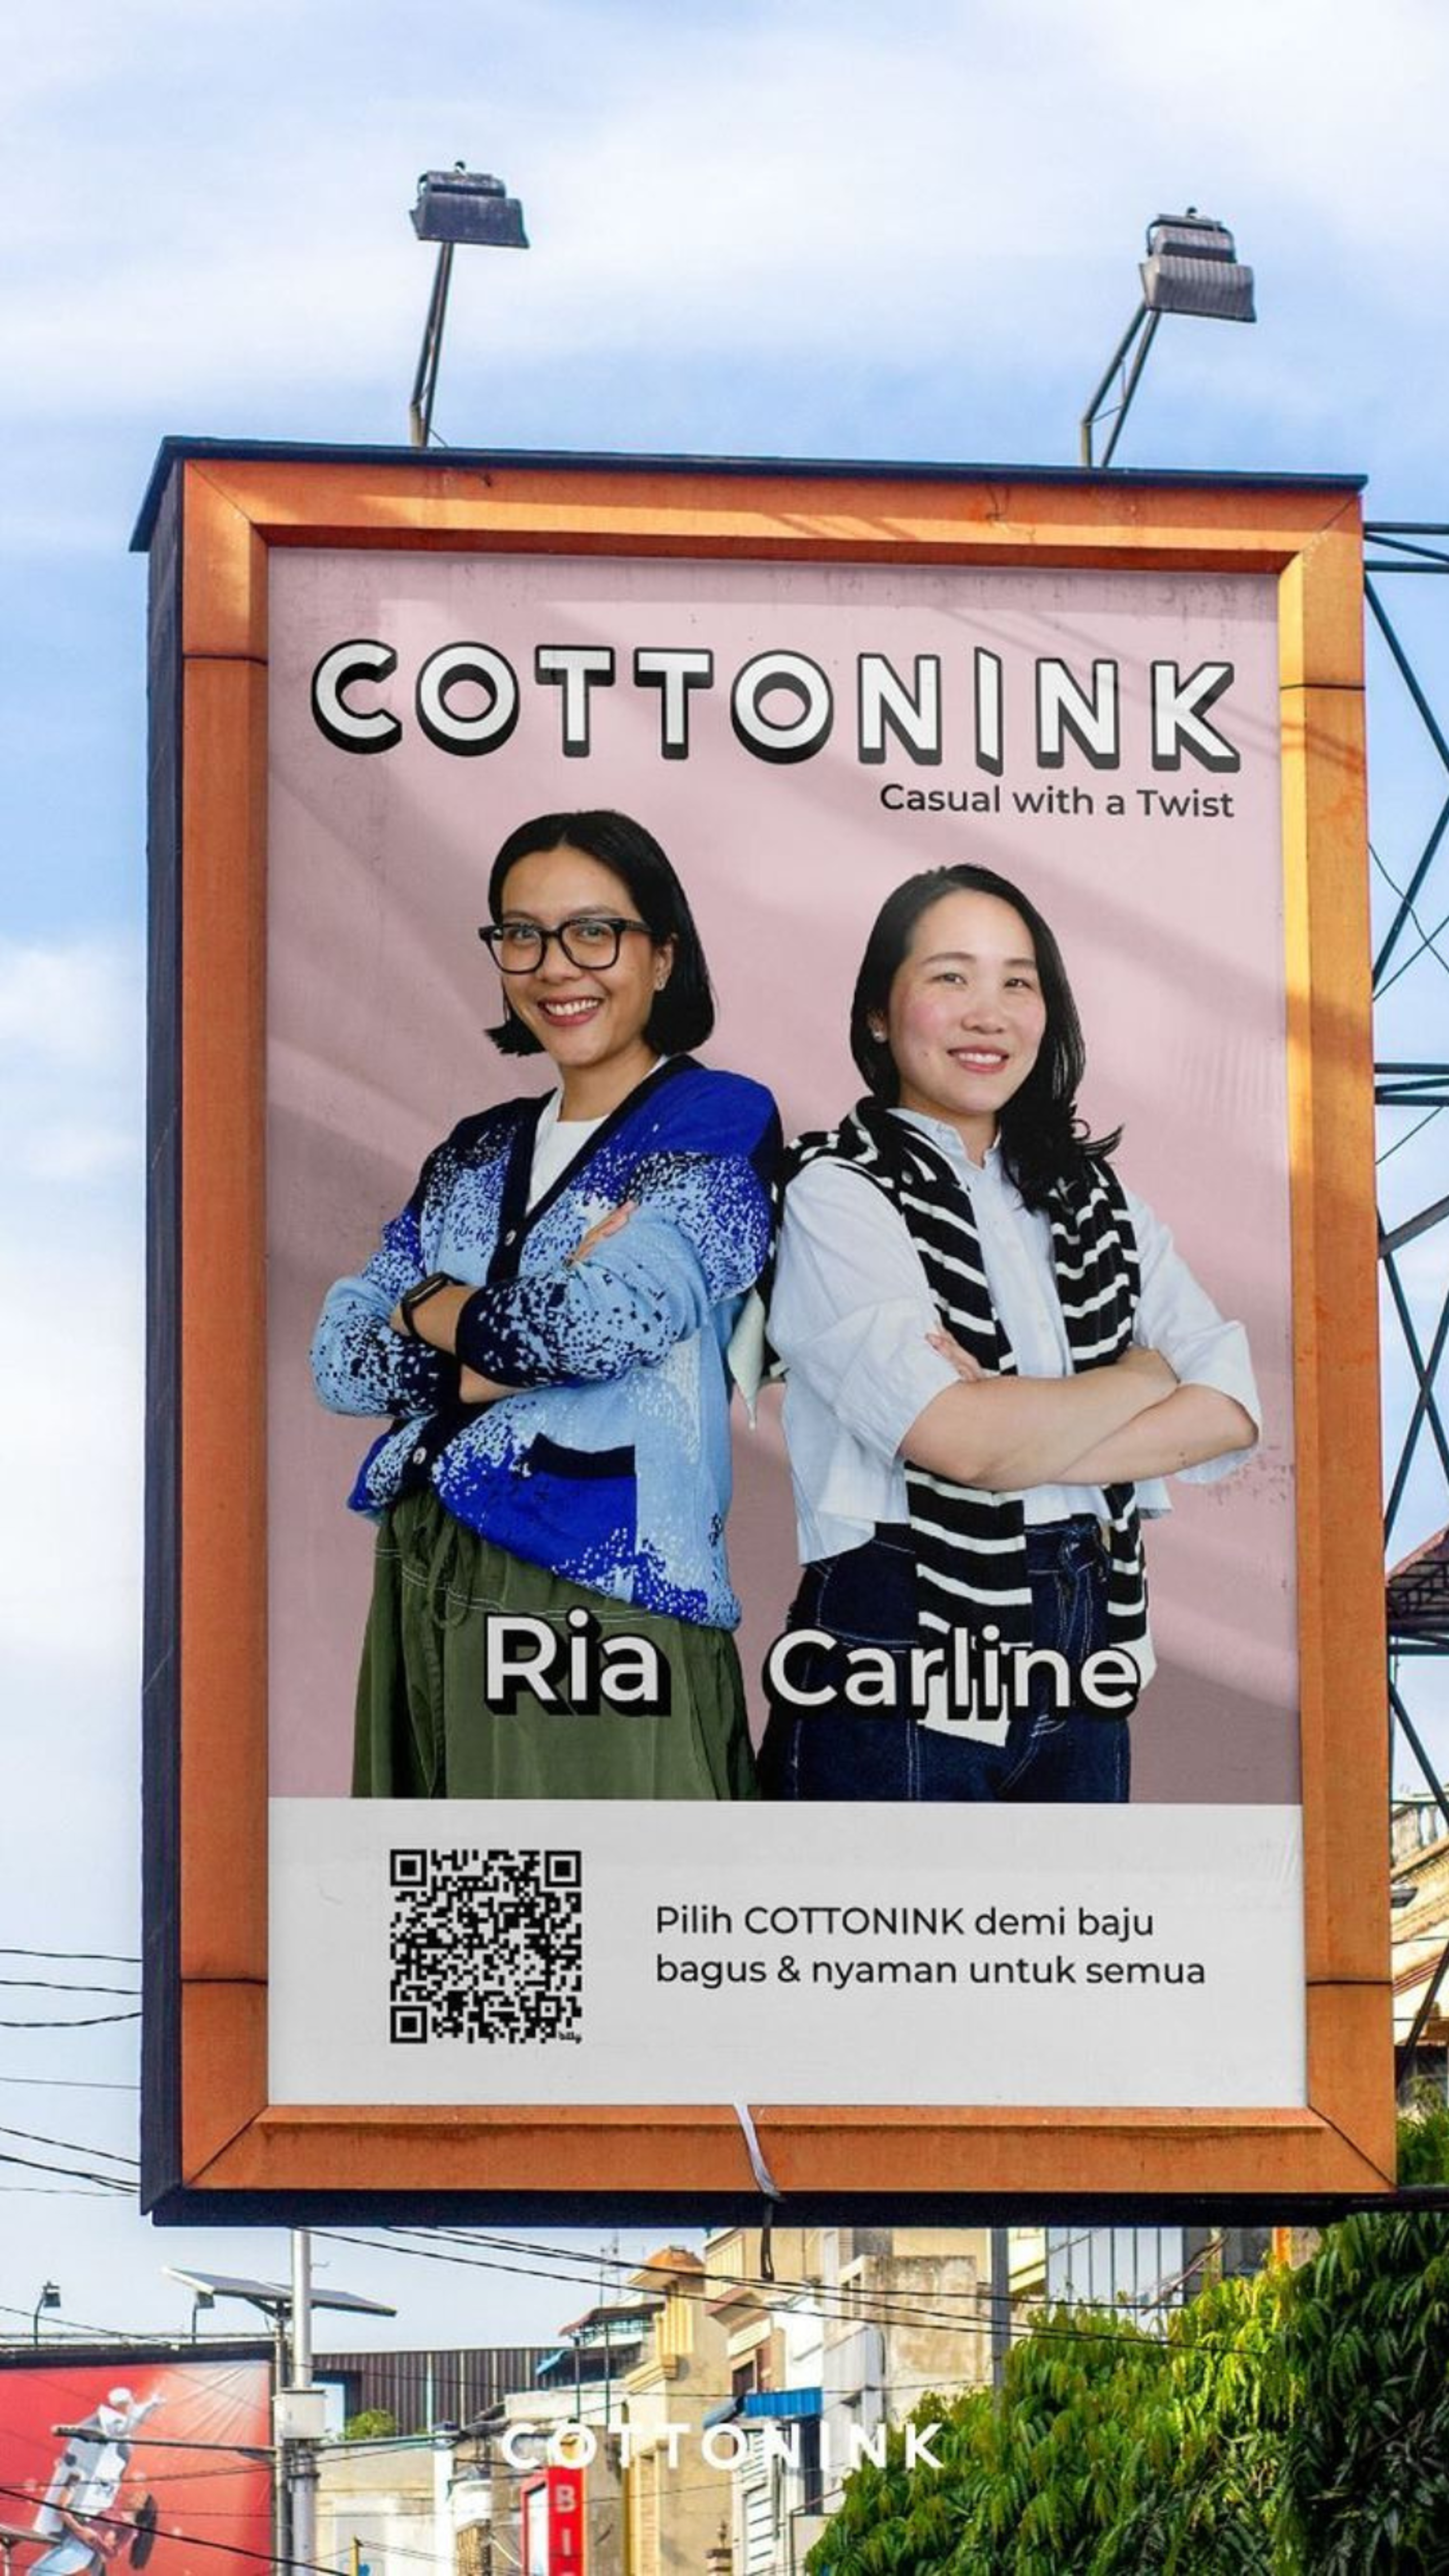 A billboard featuring two women modeling for COTTONINK, a fashion brand, with a slogan "Casual with a Twist".